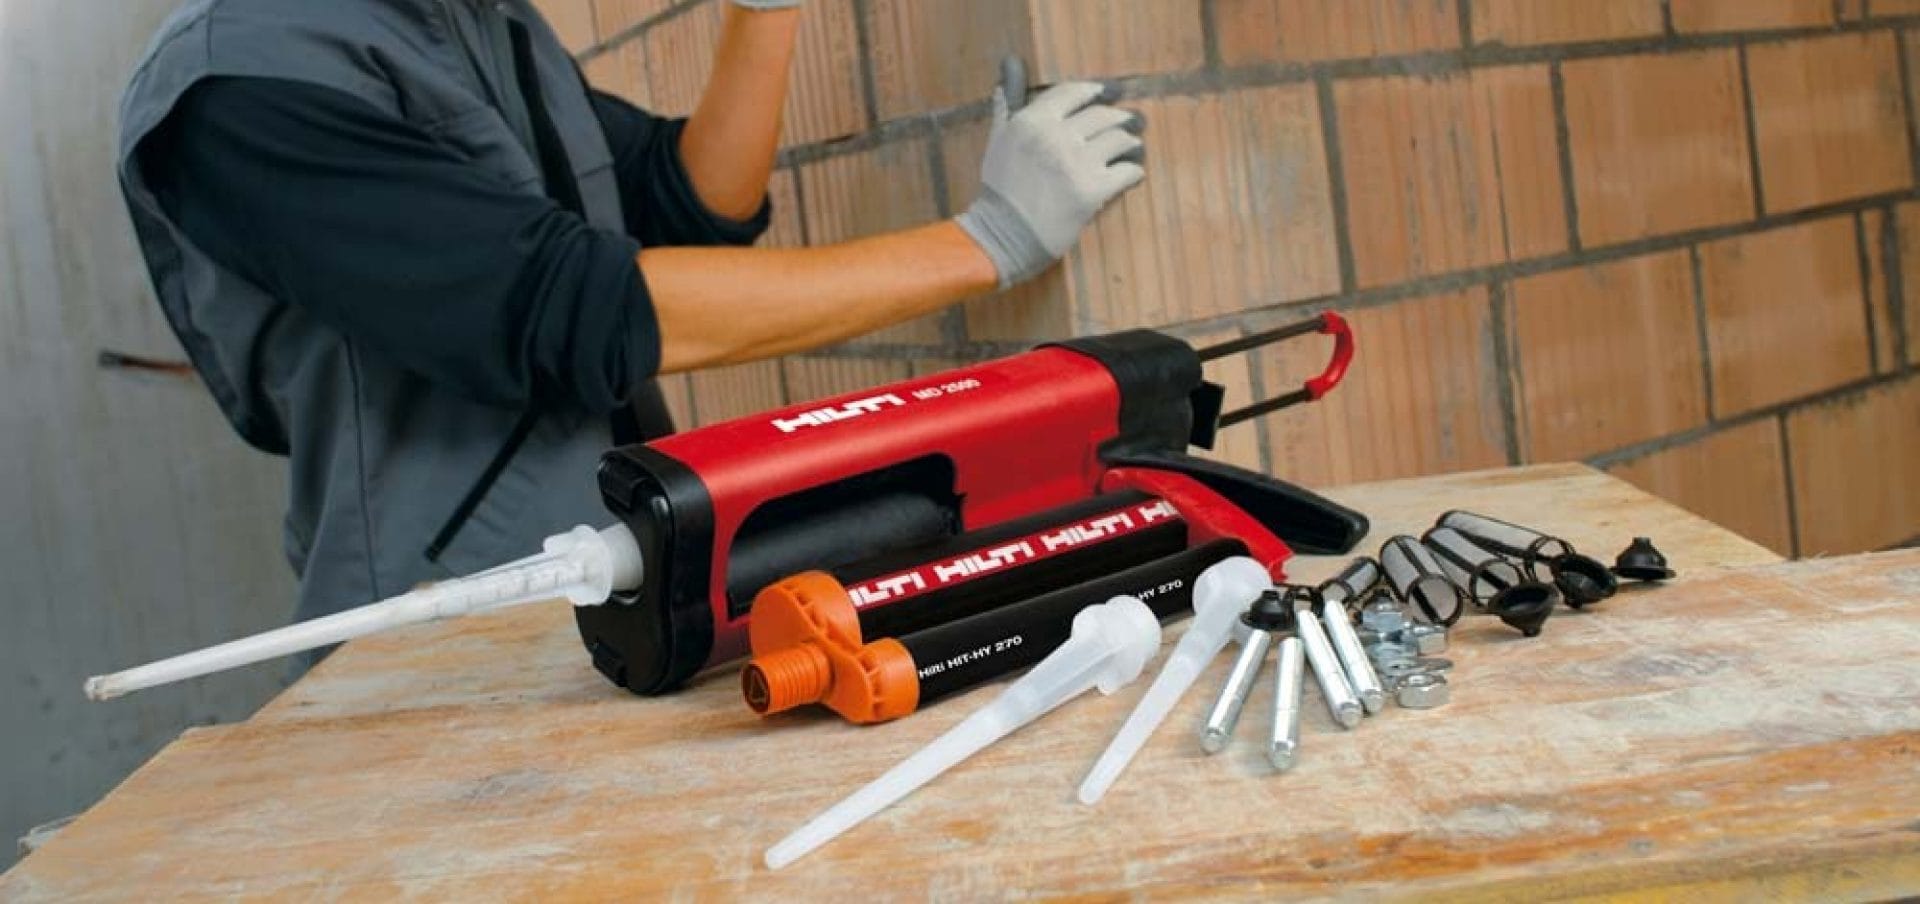 Hilti HIT-HY 270 injectable mortar